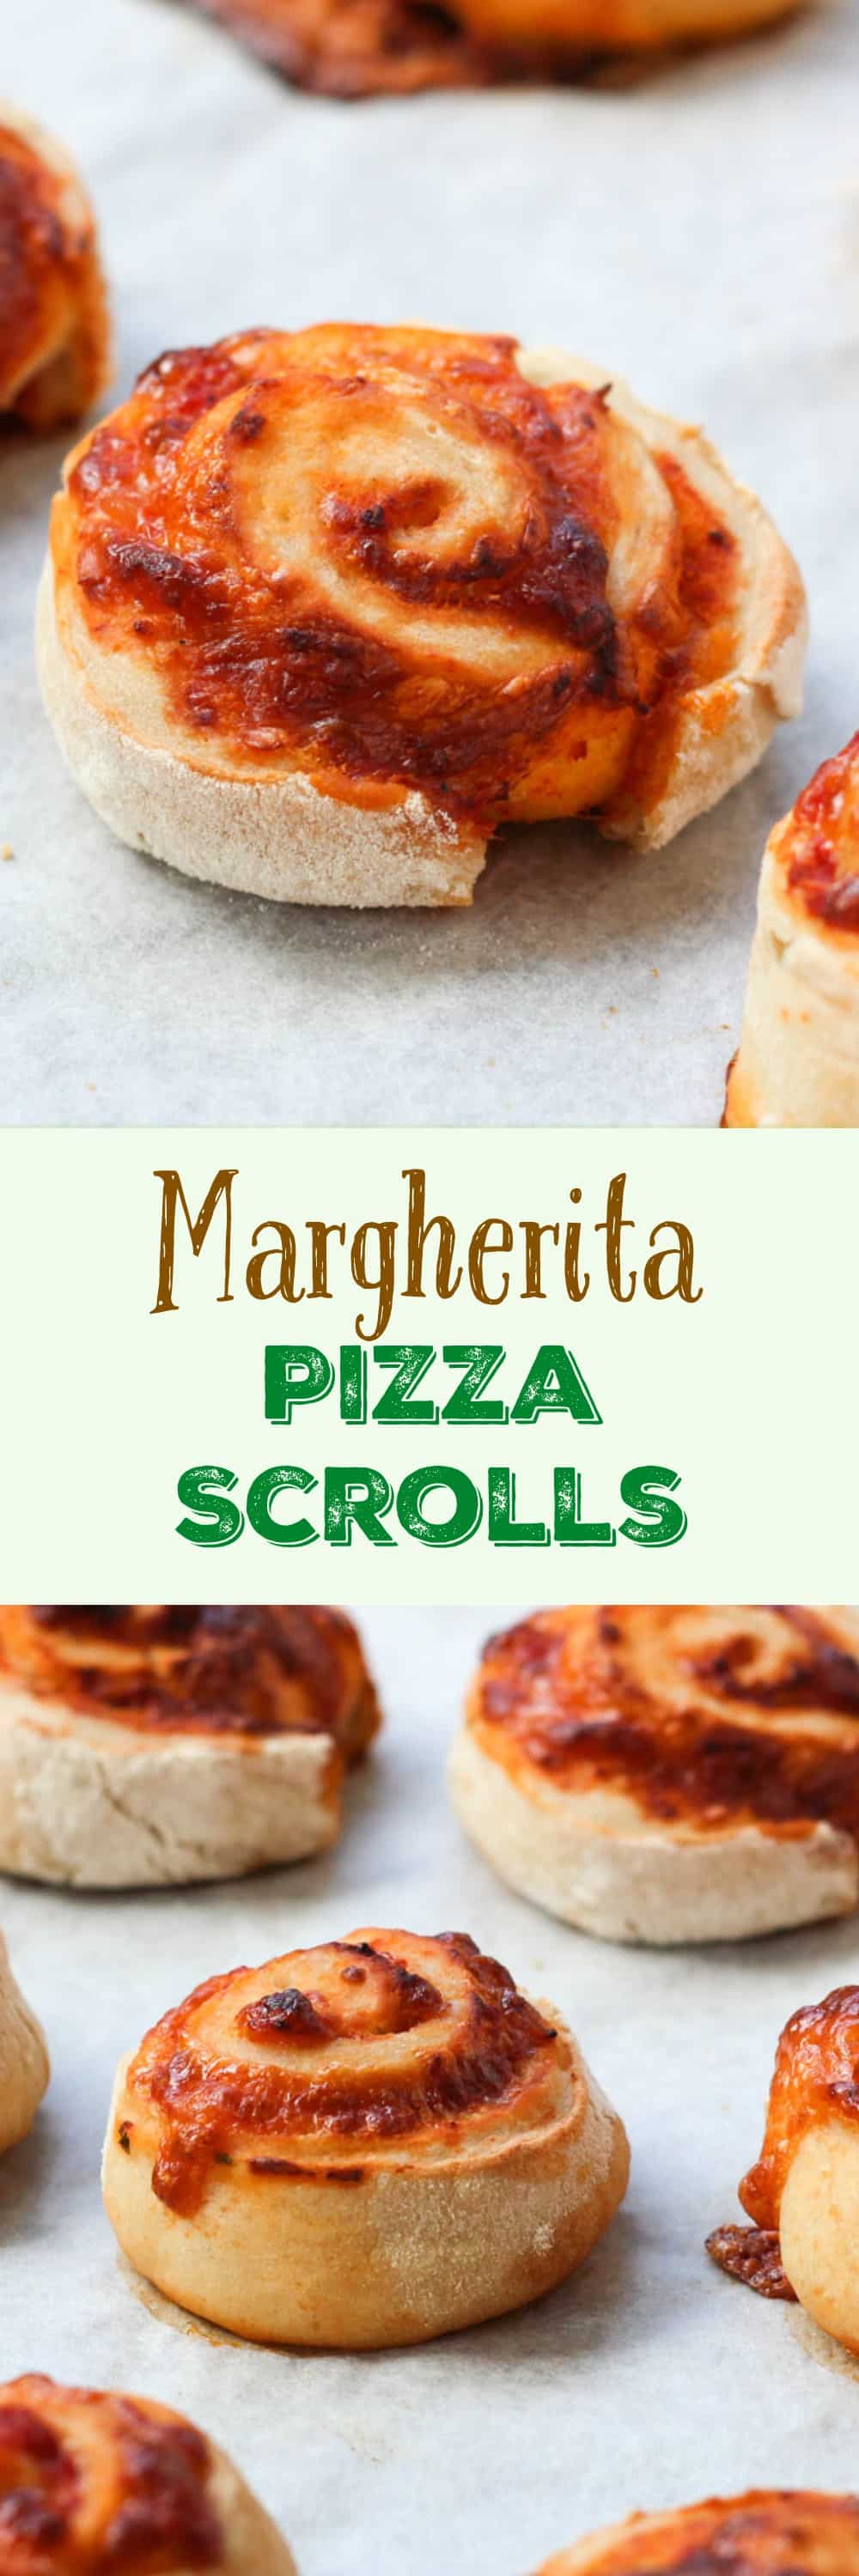 Margherita Pizza Scrolls. Easily frozen, and perfect for the lunchbox or kids parties.